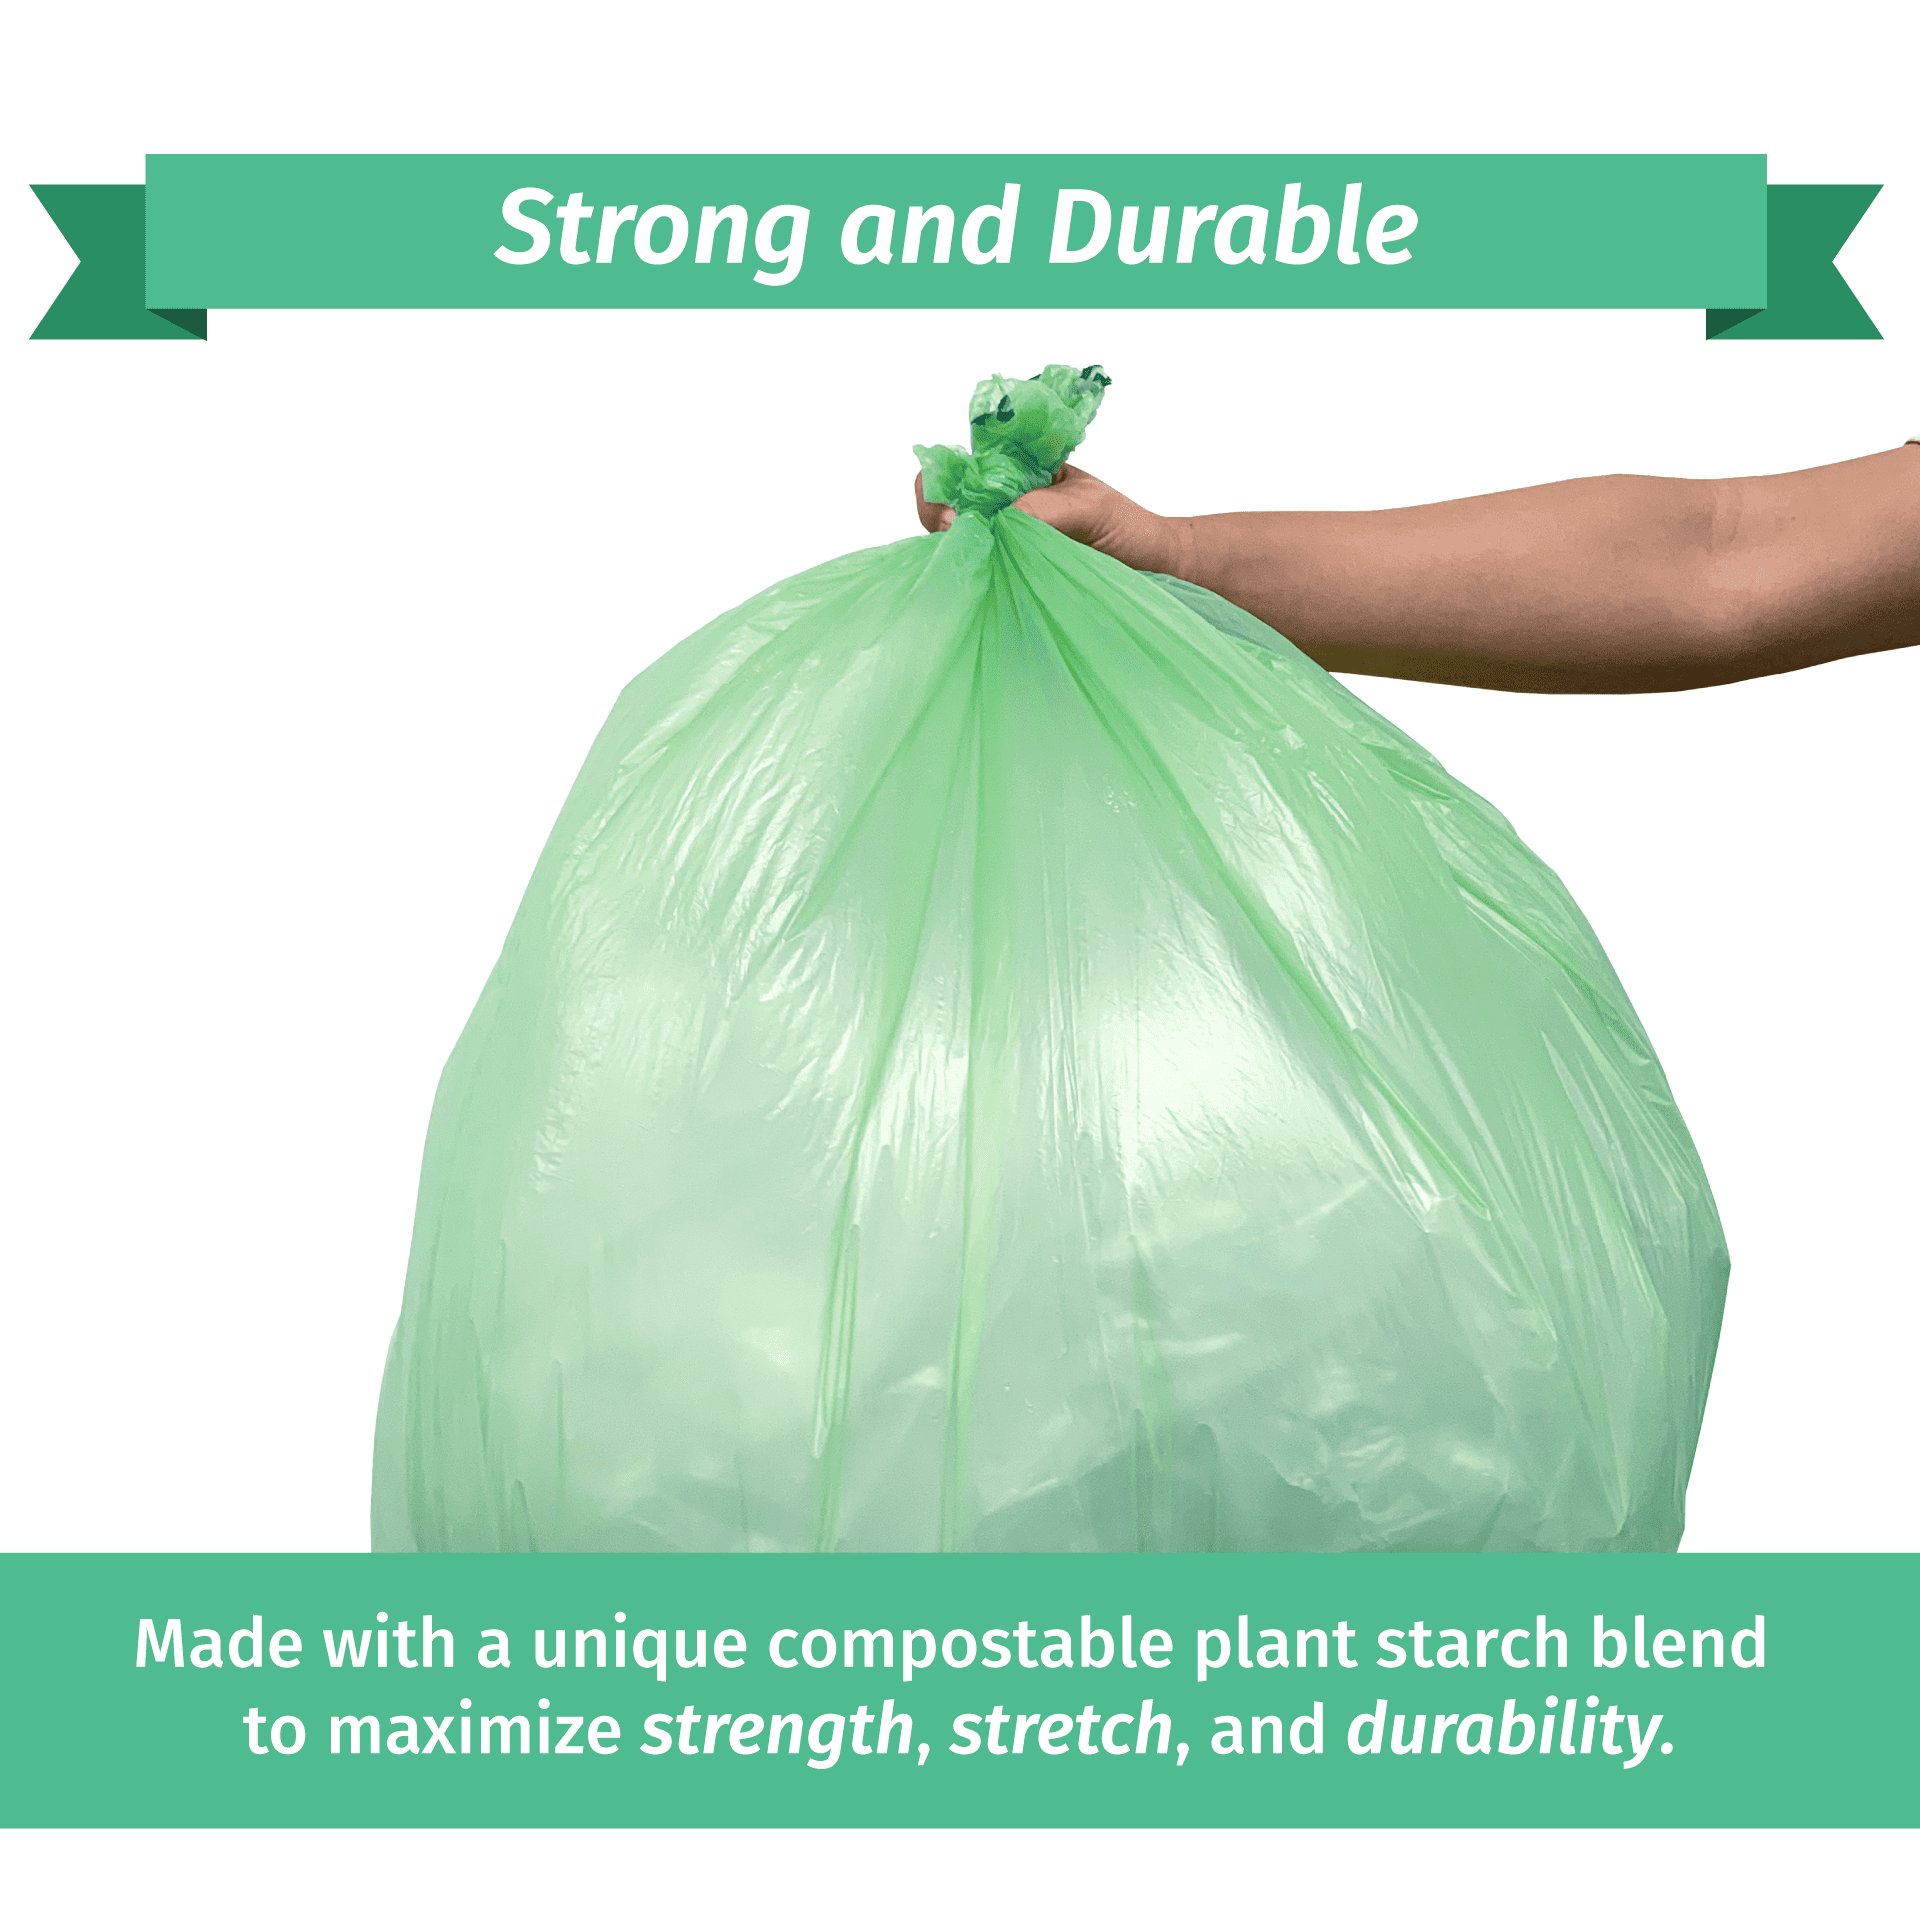 Reli. Biodegradable 33 Gallon Trash Bags, 100 Count, Green Eco Friendly,  Degradable Under Certain Conditions, Custom-Fit for Compactor